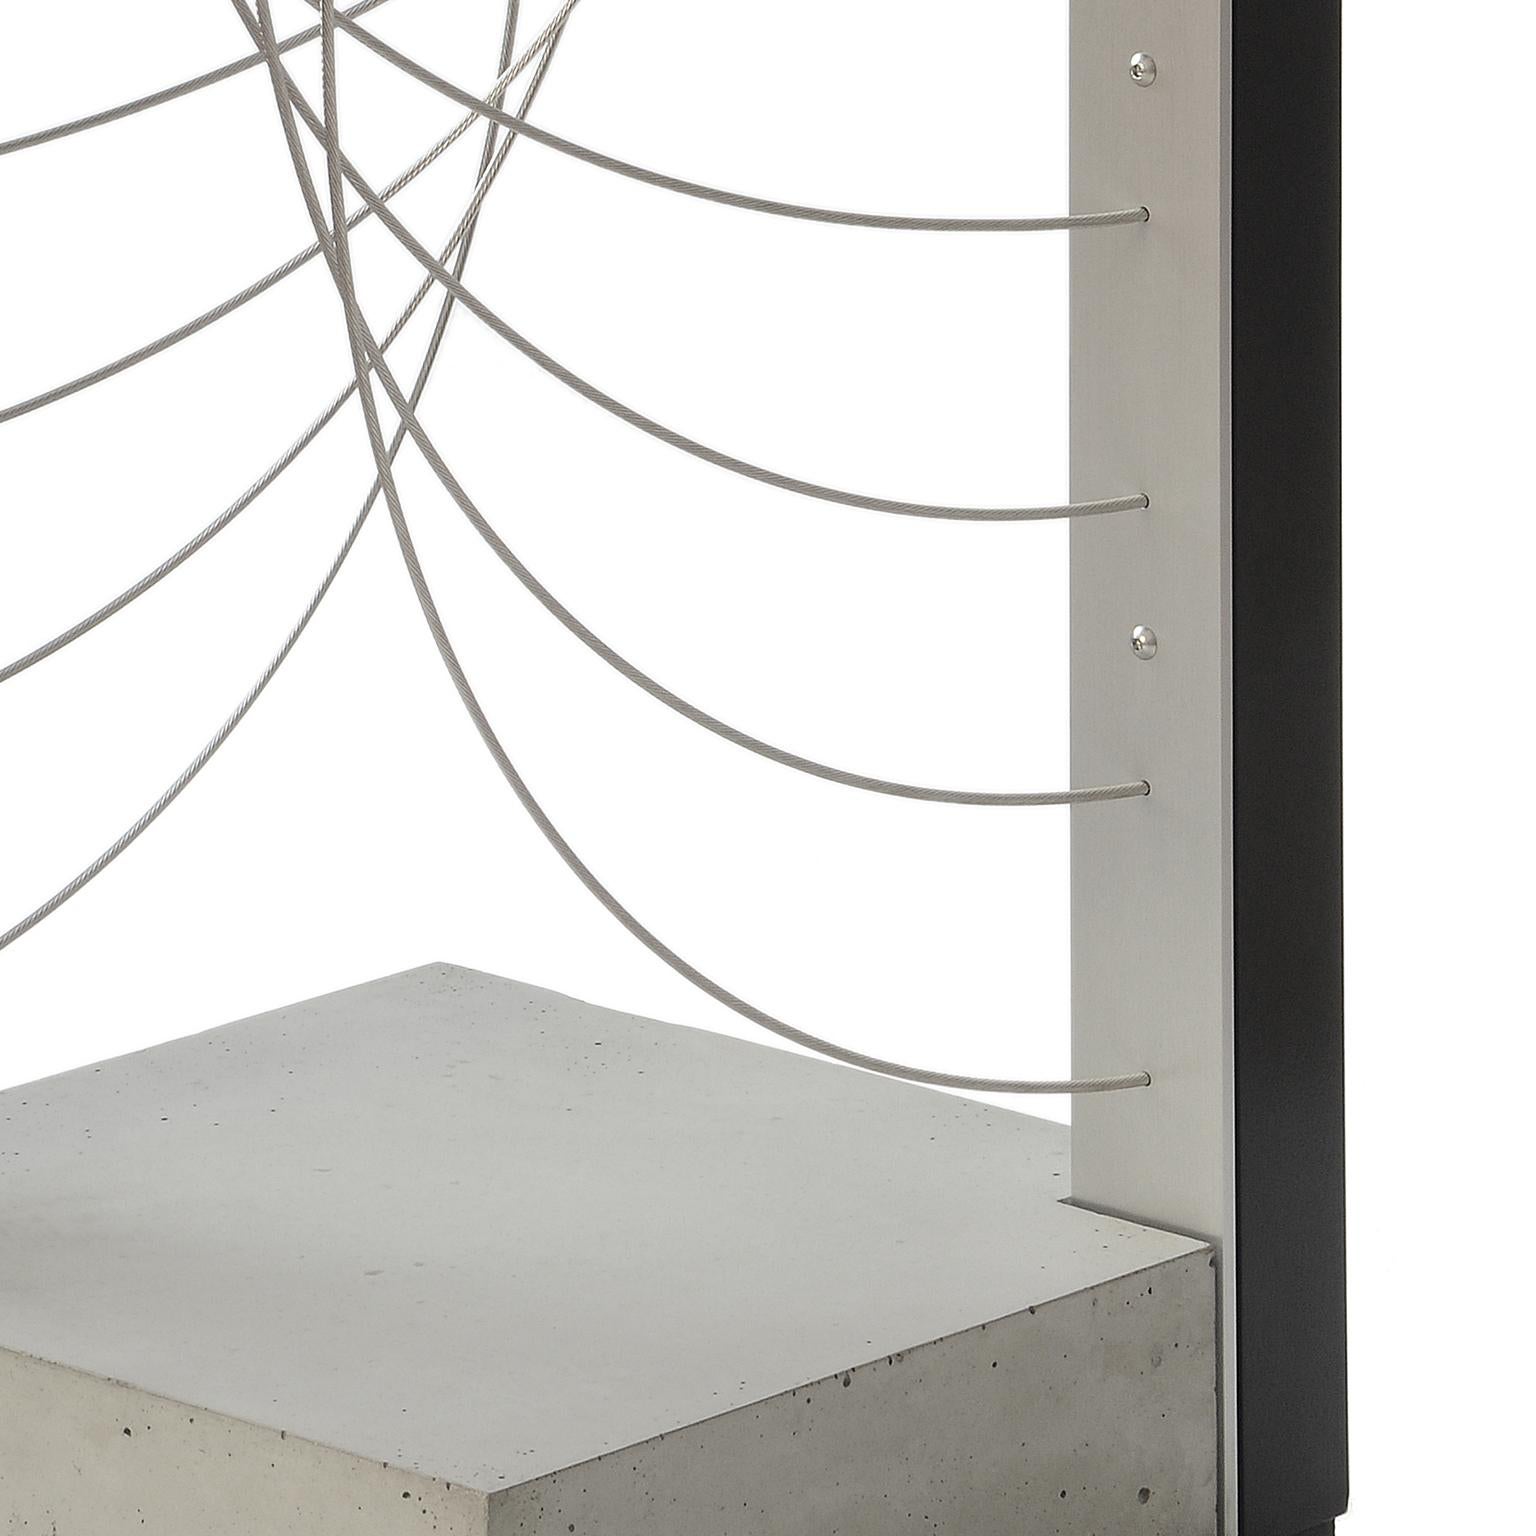 The largest size of the Xenon table available. It has a 16 inch square top and stands 40 inches tall. This pedestal features stainless steel cables twisted into a series of pleasing bends. It has a sculptural presence to uniquely accent your room.